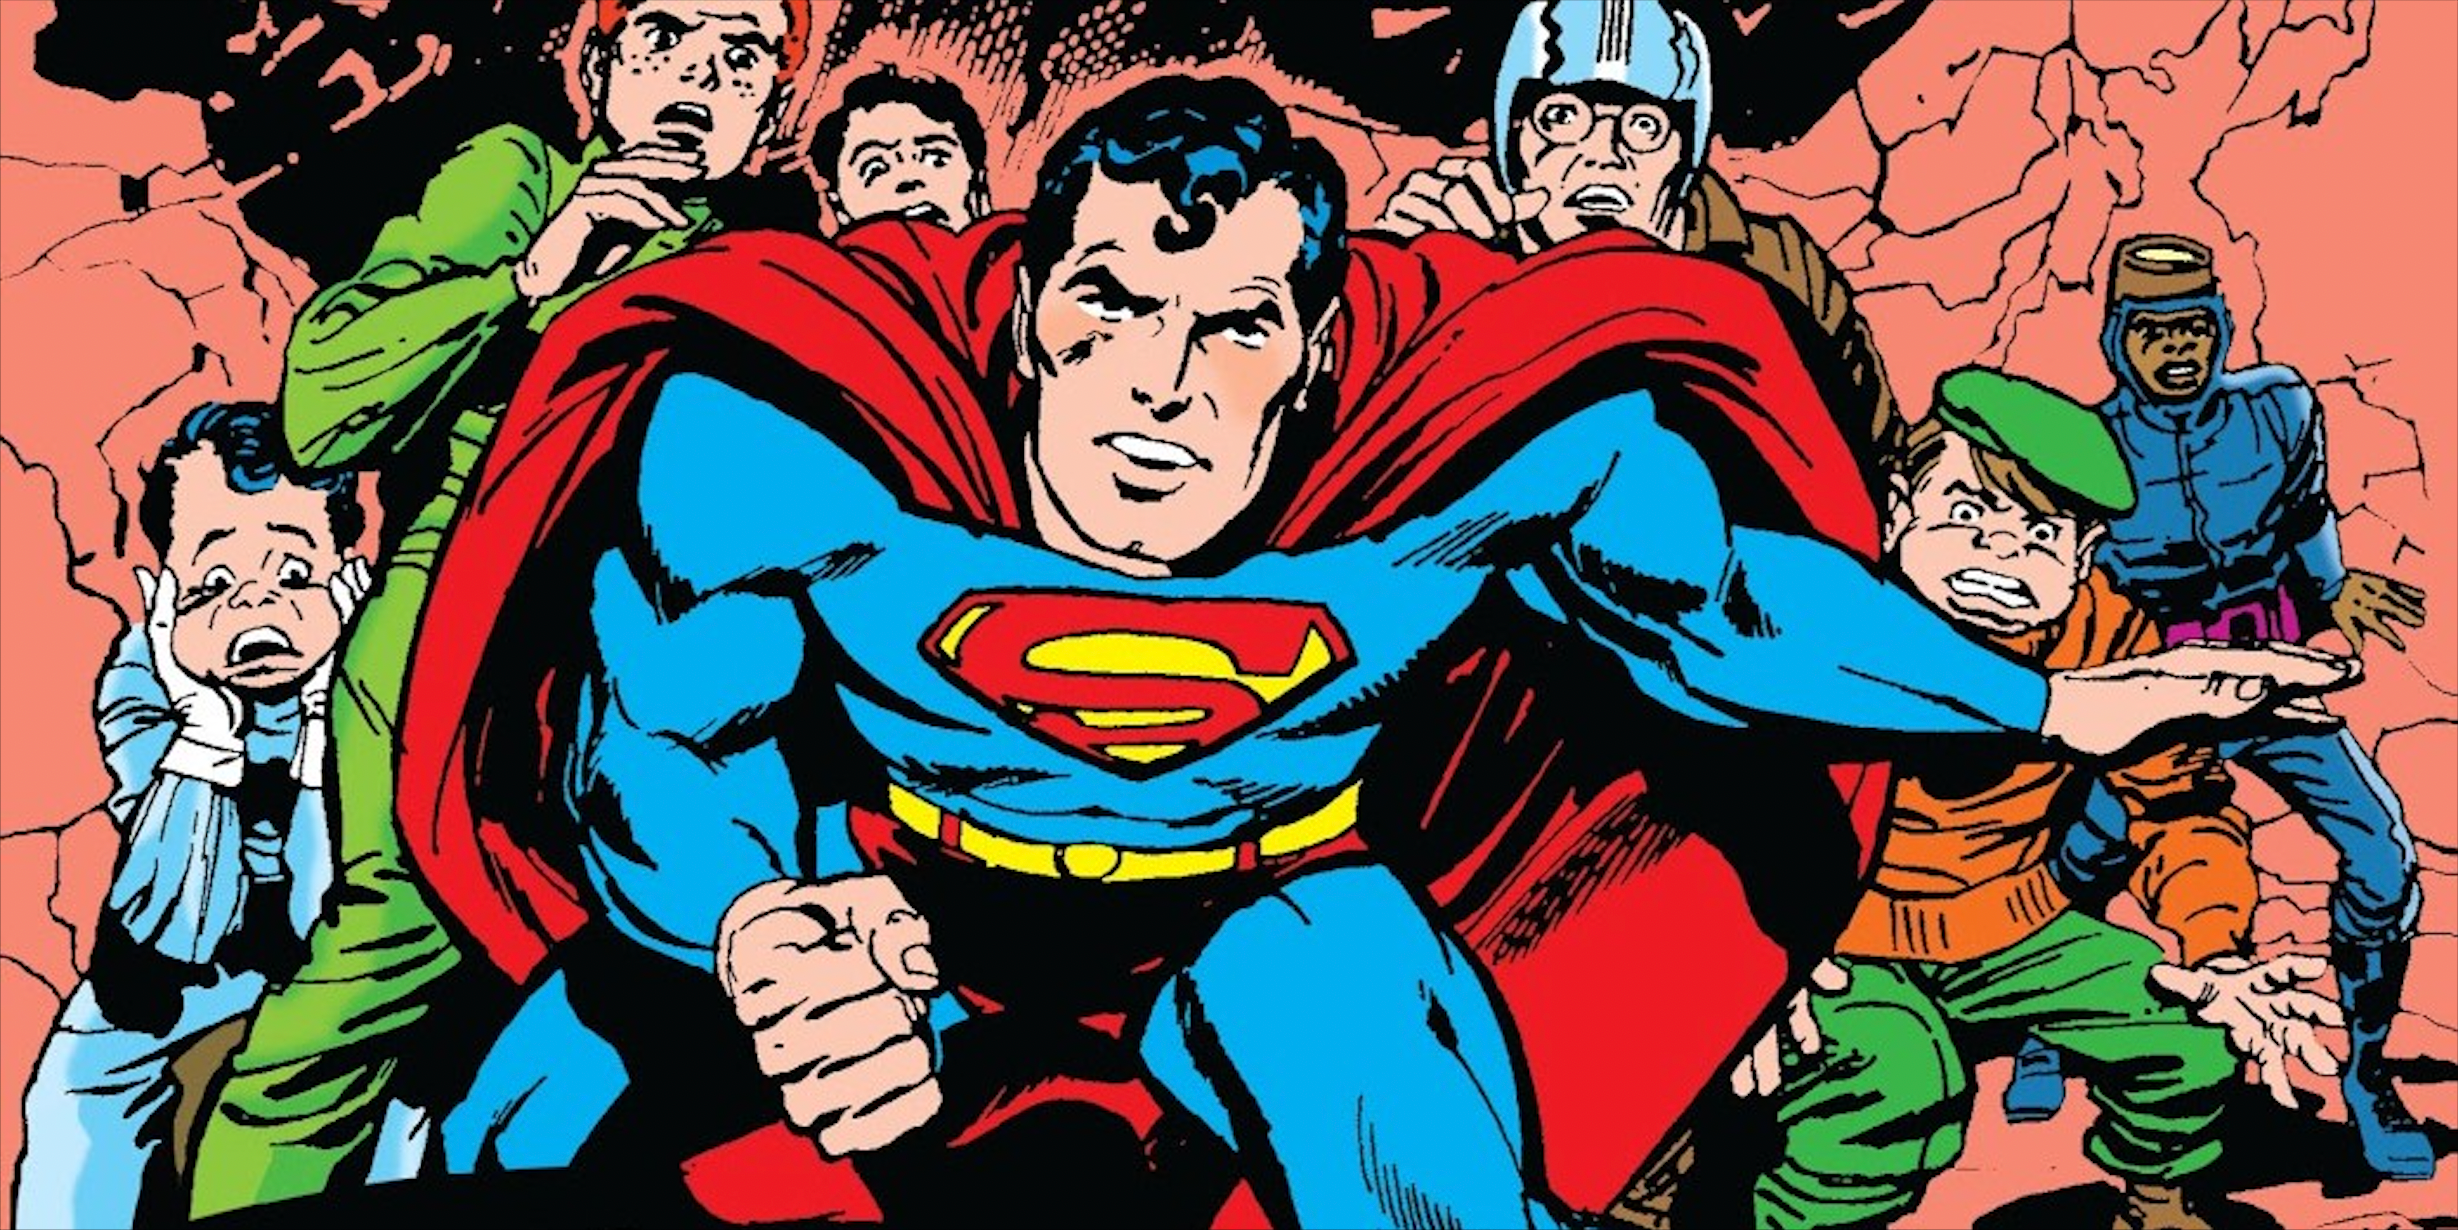 DC Actually Hired Jack Kirby to Draw Superman, Then Erased His Work